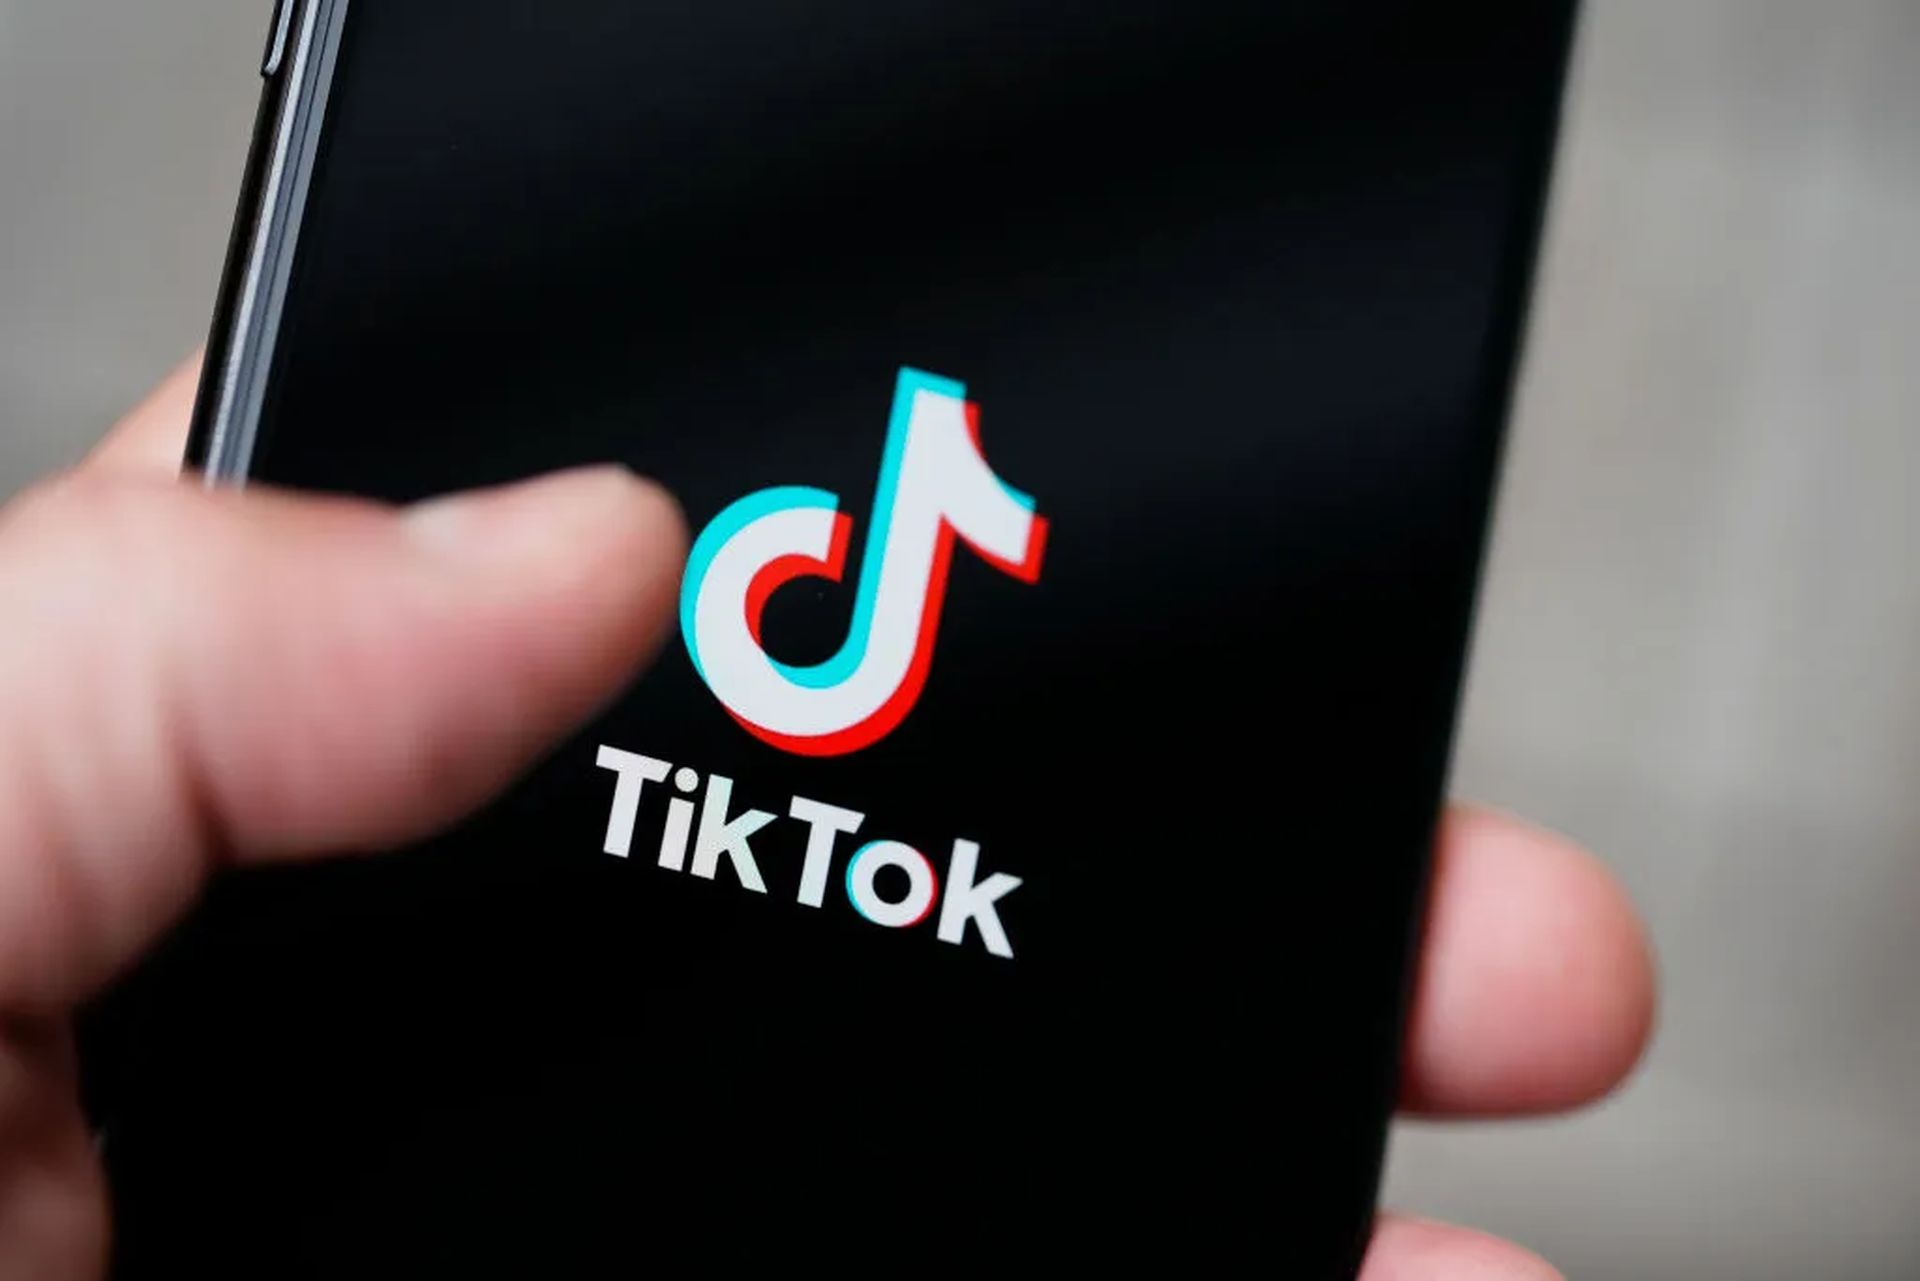 In this article, we are going to be covering what is the biggest cult on TikTok, so you can learn what is the hype lately has been all about.